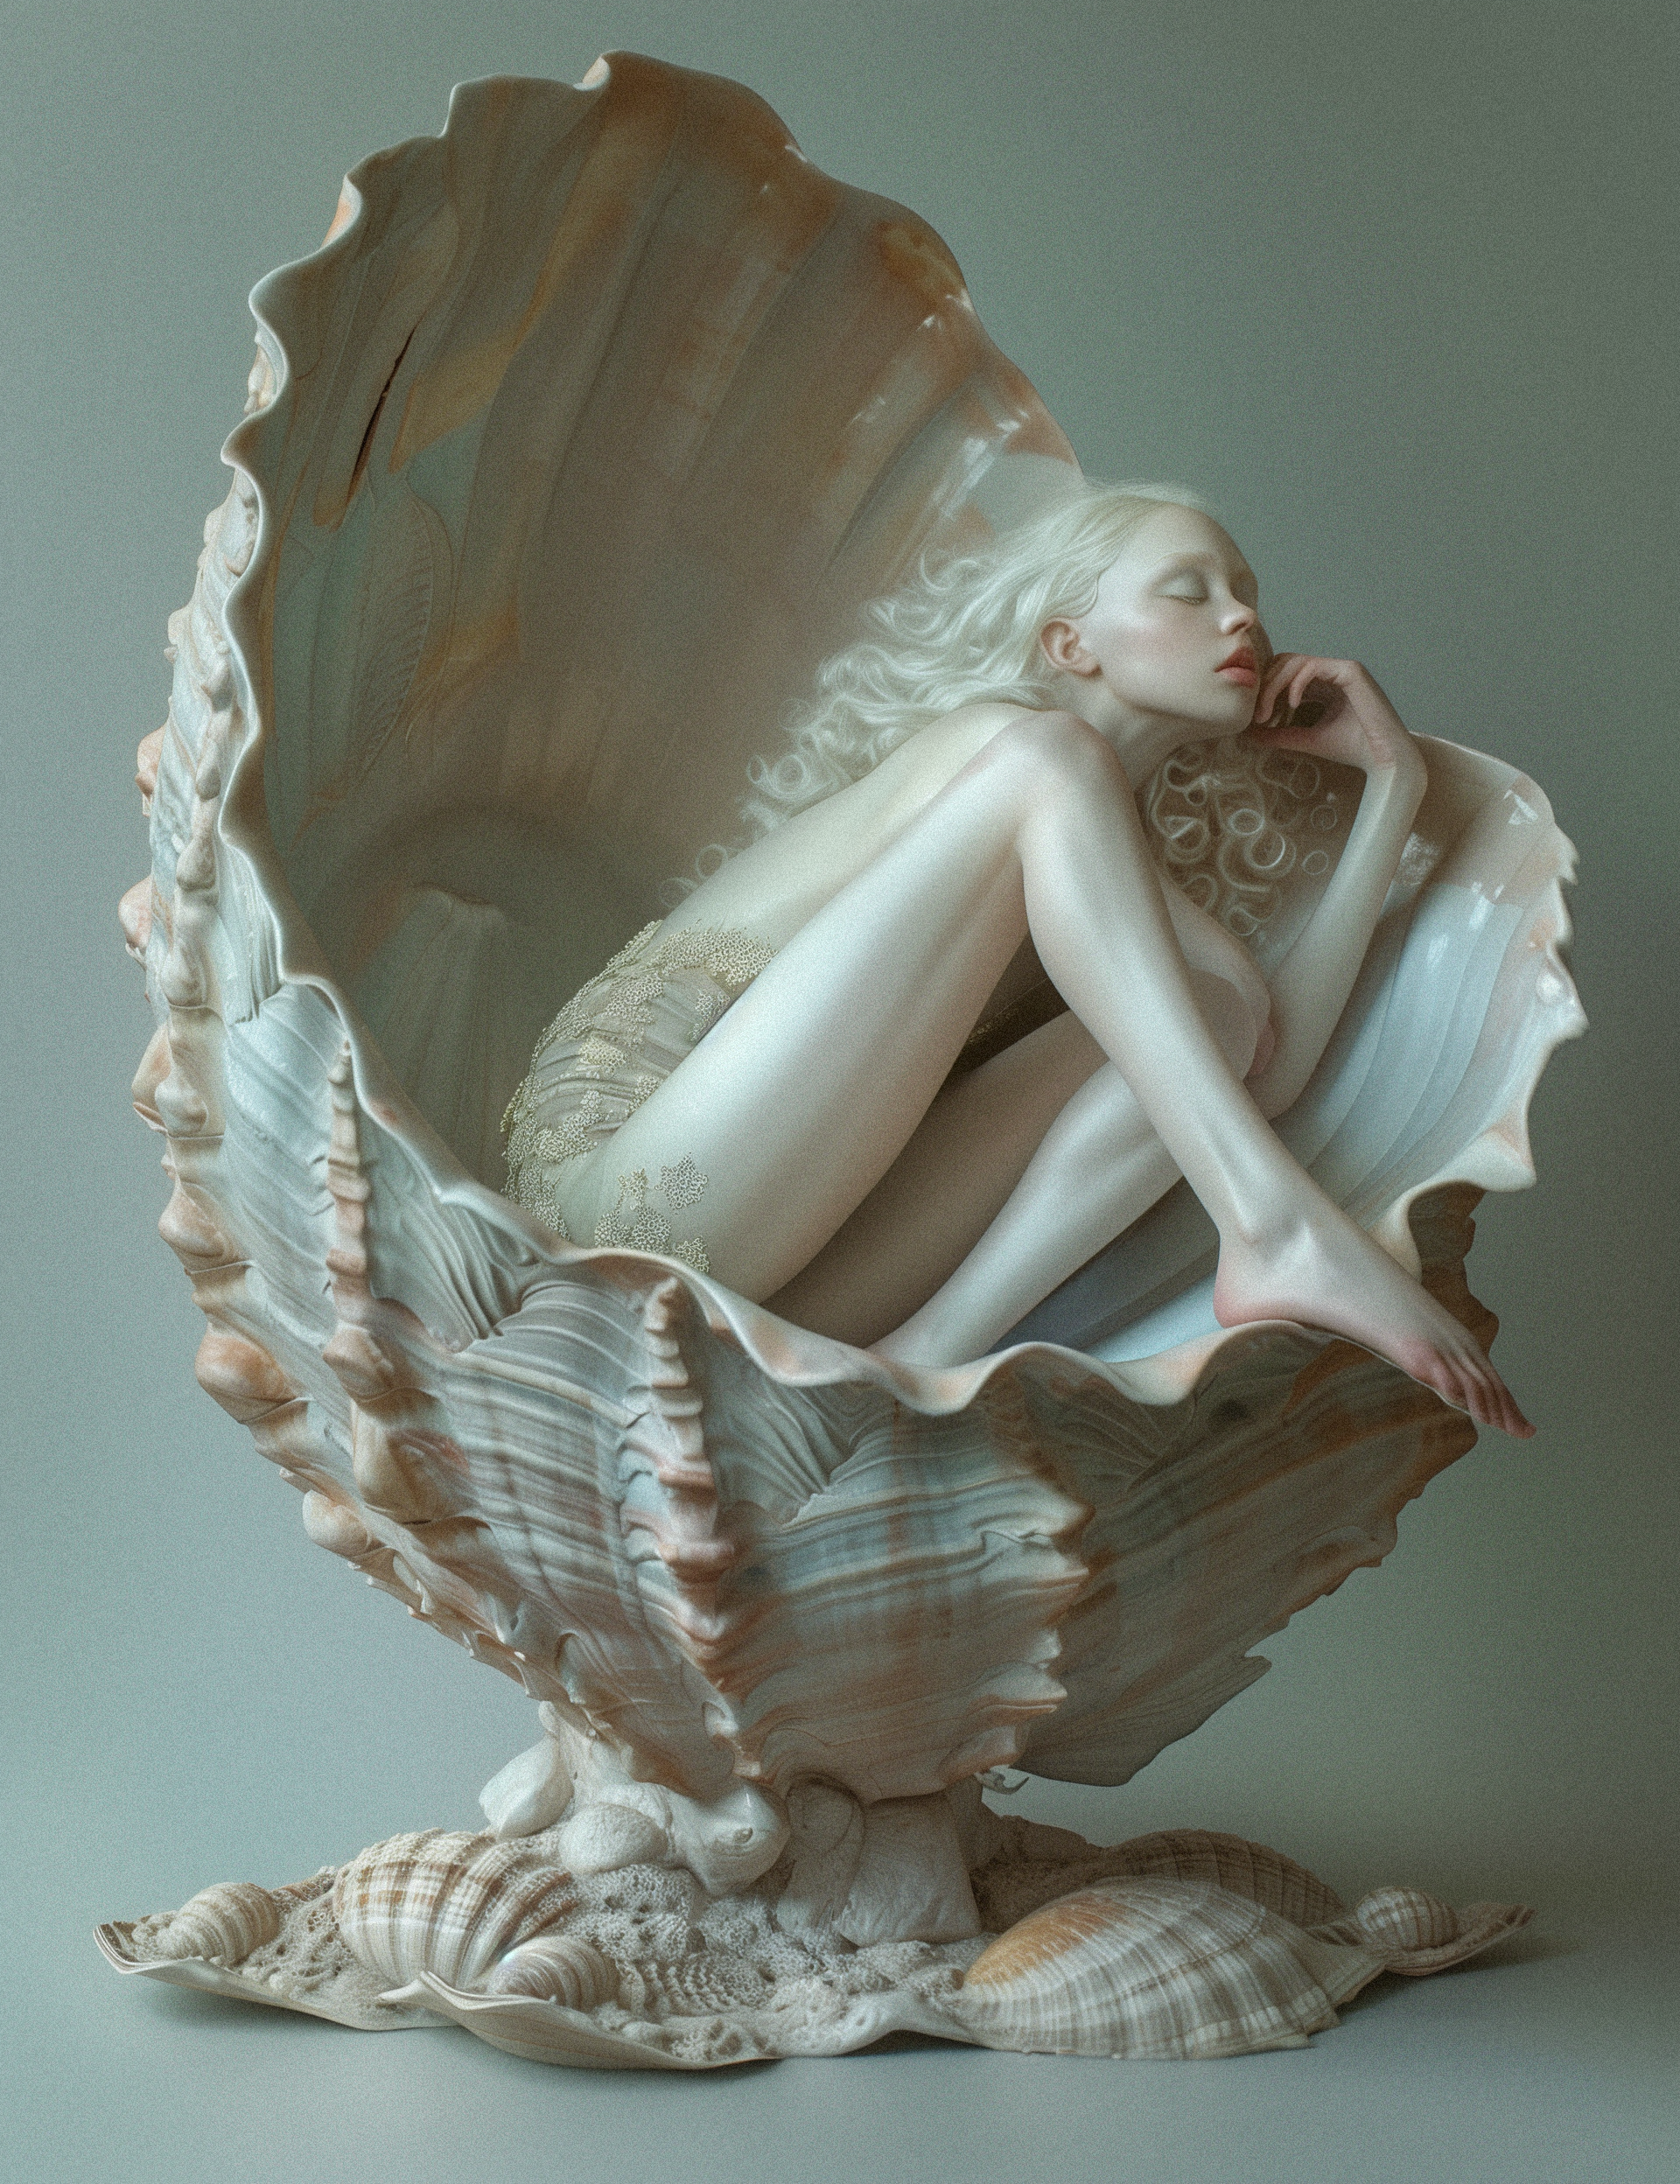 maeganm_siren_laying_in_a_large_decorative_shell_in_the_style_o_a10506f6-9702-4b18-b771-d546c4548e98 copy.png